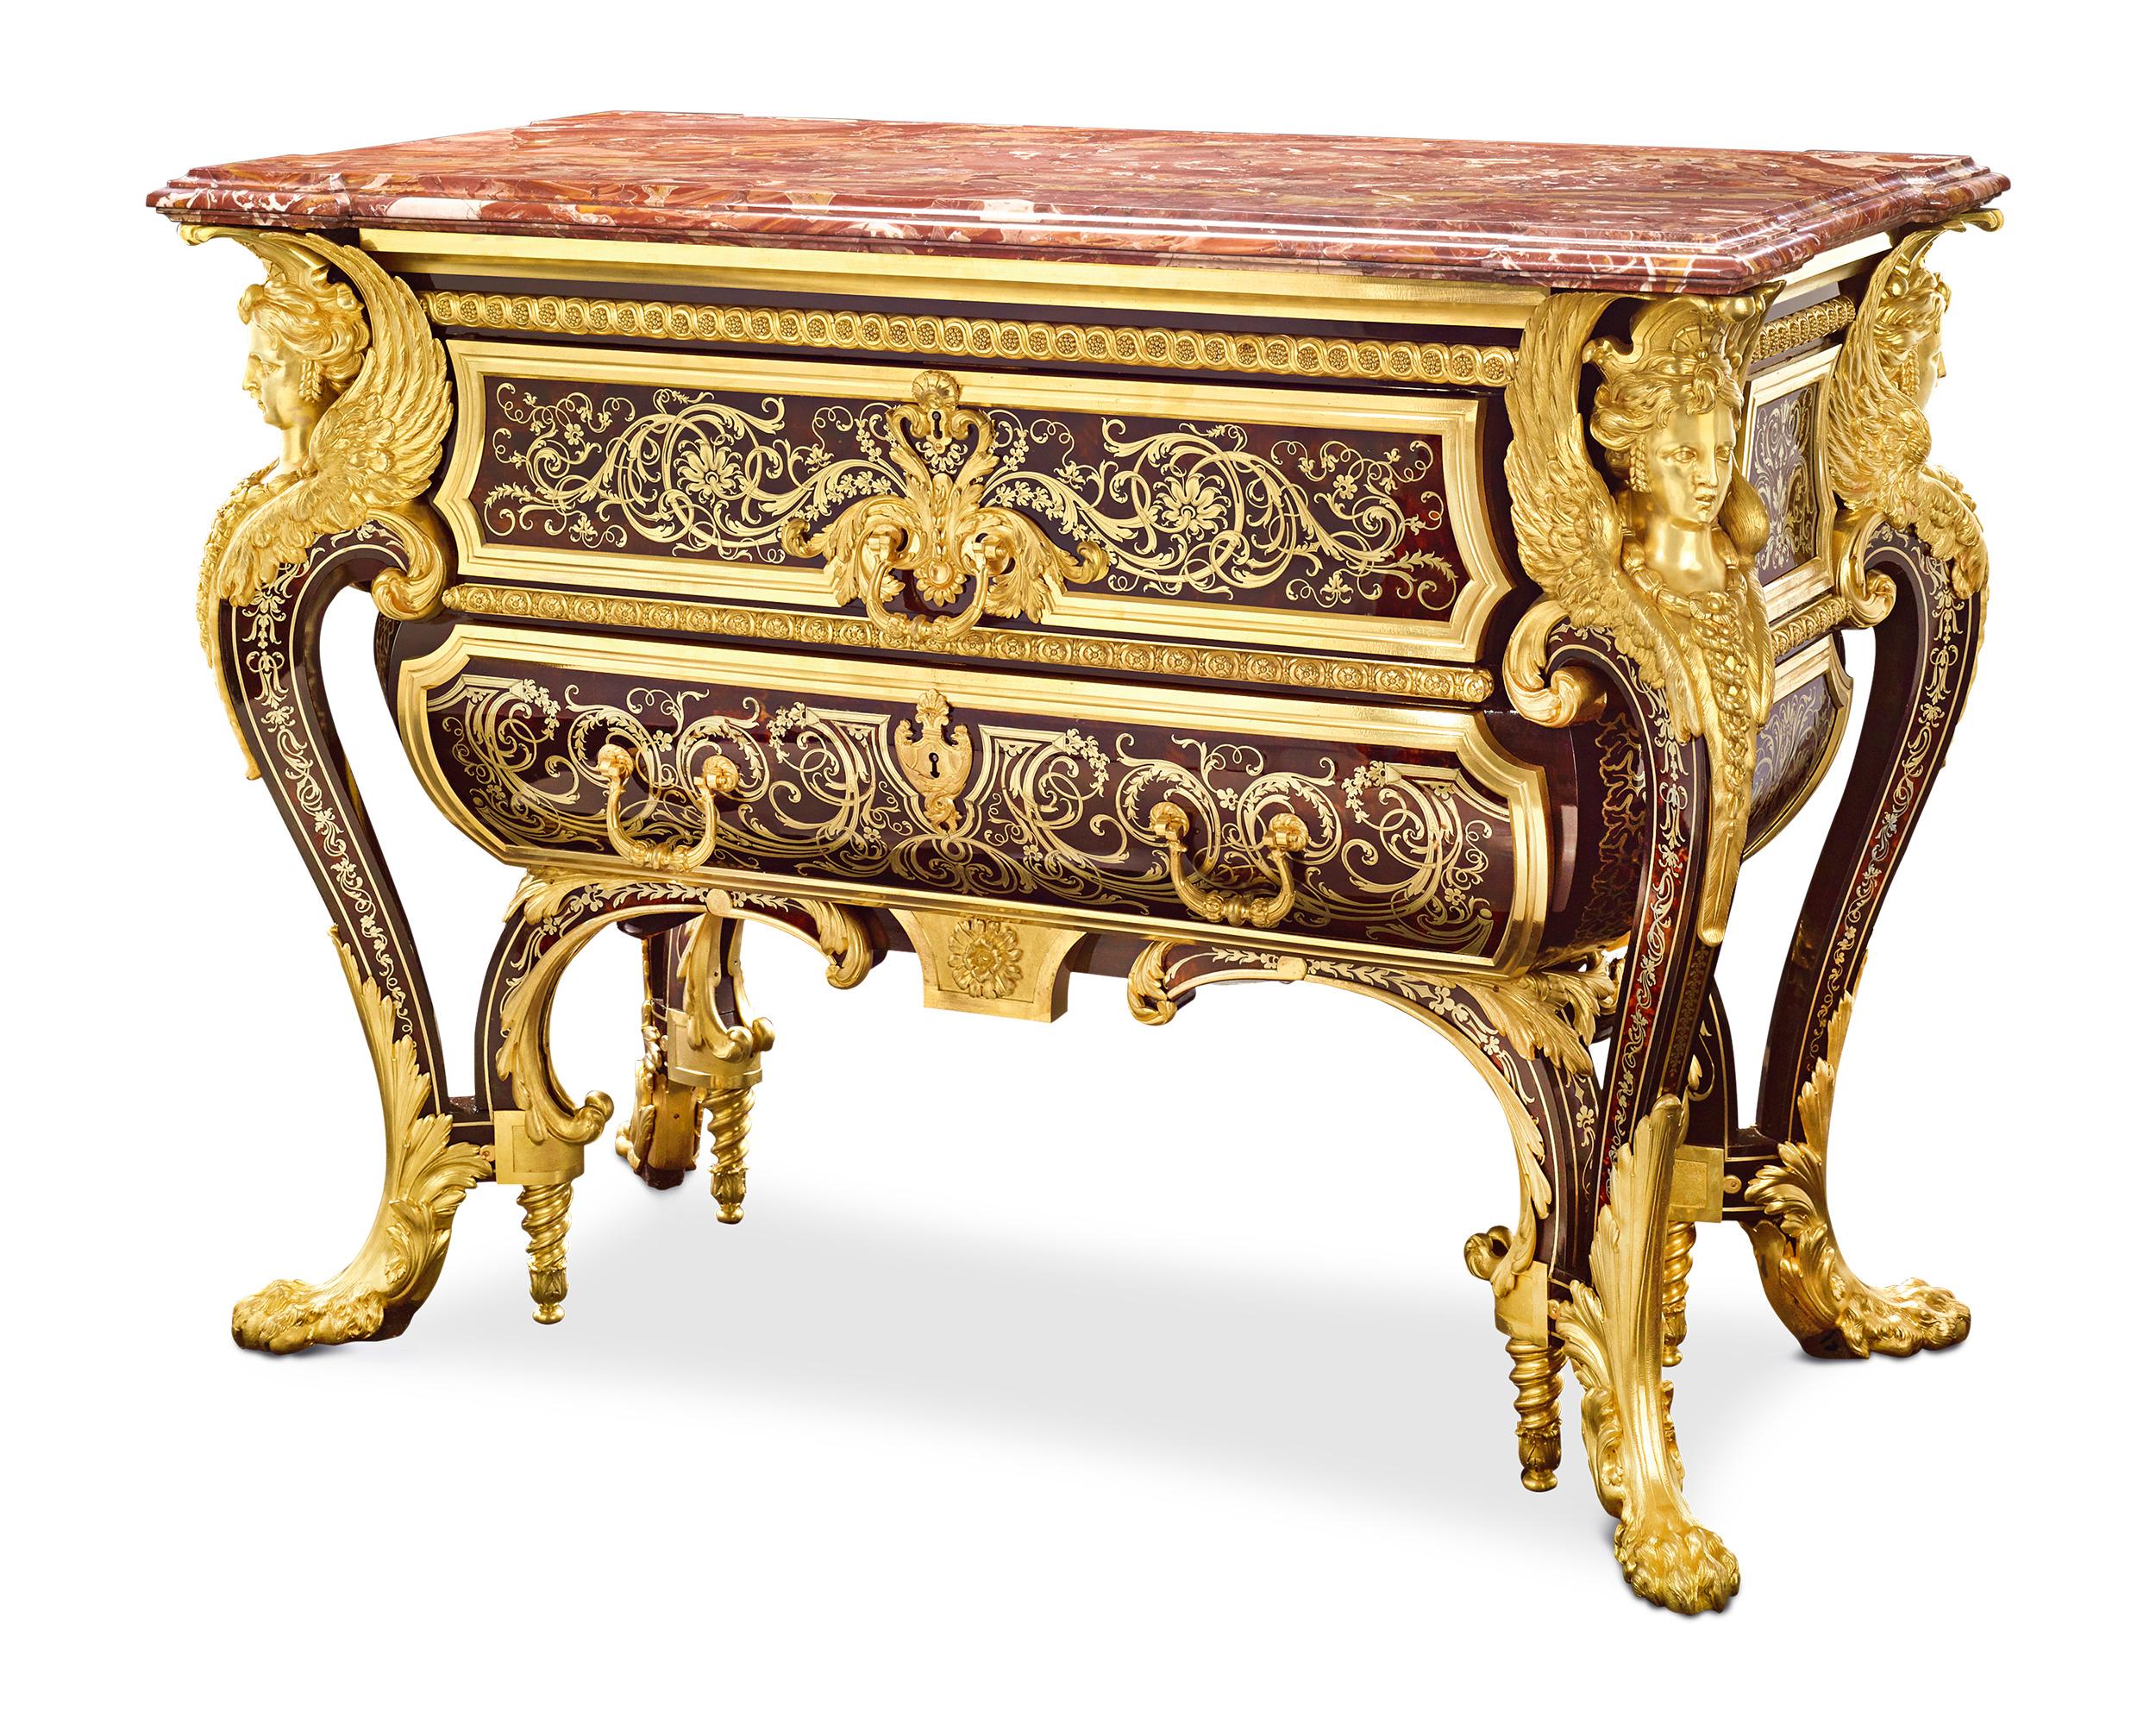 This monumental Boulle commode was crafted by Robert Blake, one of the finest and most important English cabinetmakers of his time. It is modeled after the legendary pair of commodes made for France’s King Louis XIV by master ébéniste André-Charles